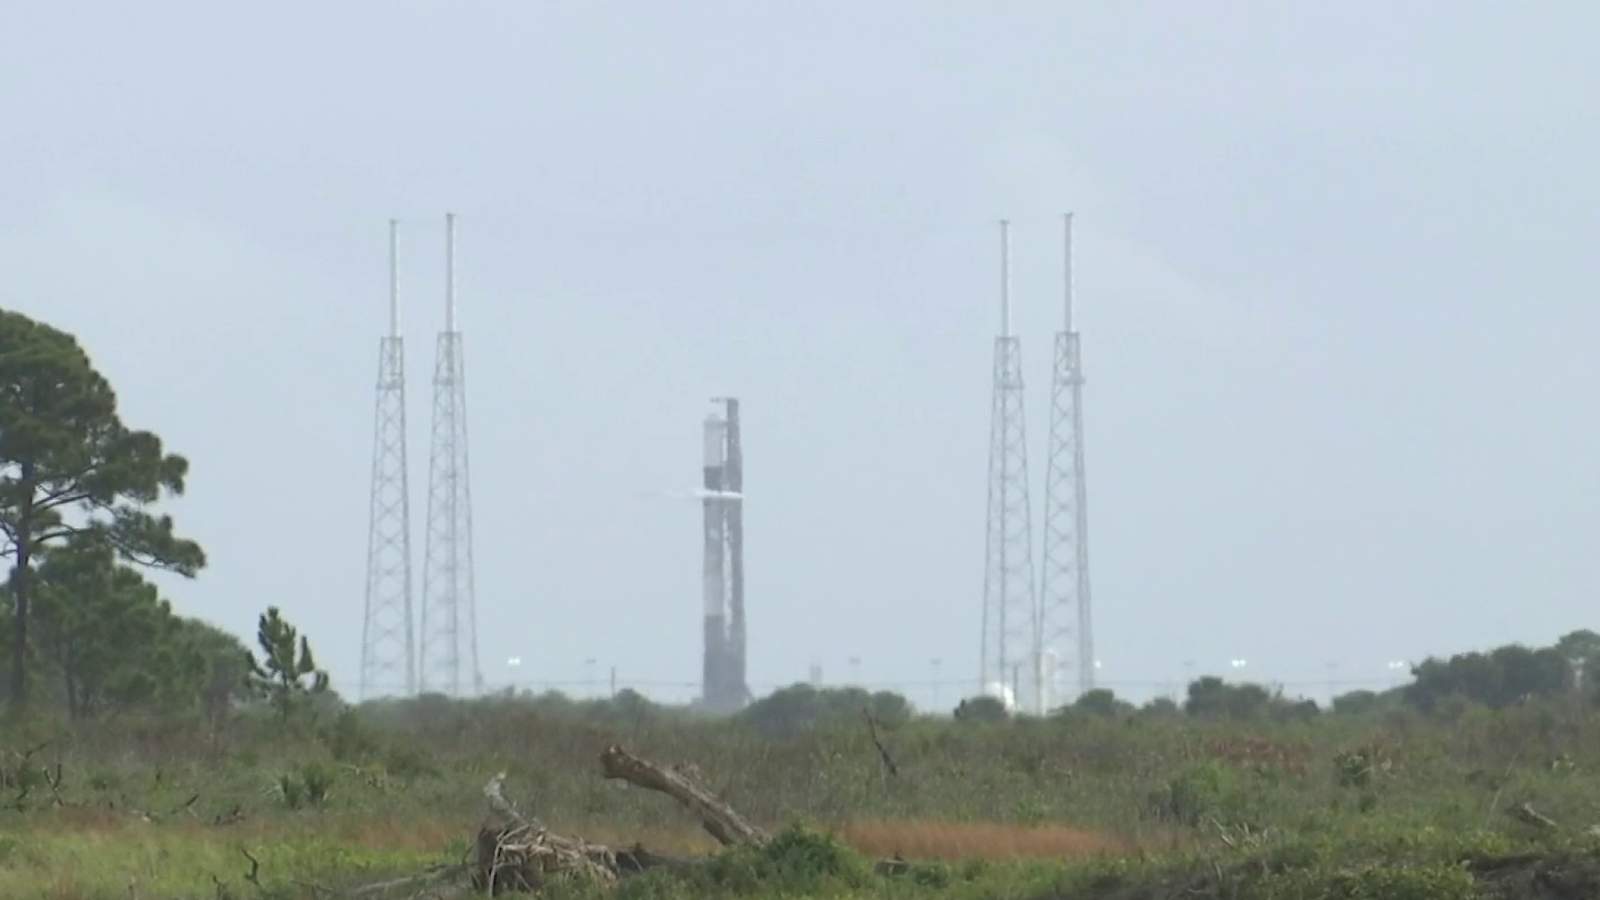 Ready for an action-packed week? SpaceX schedules next launch from Cape Canaveral